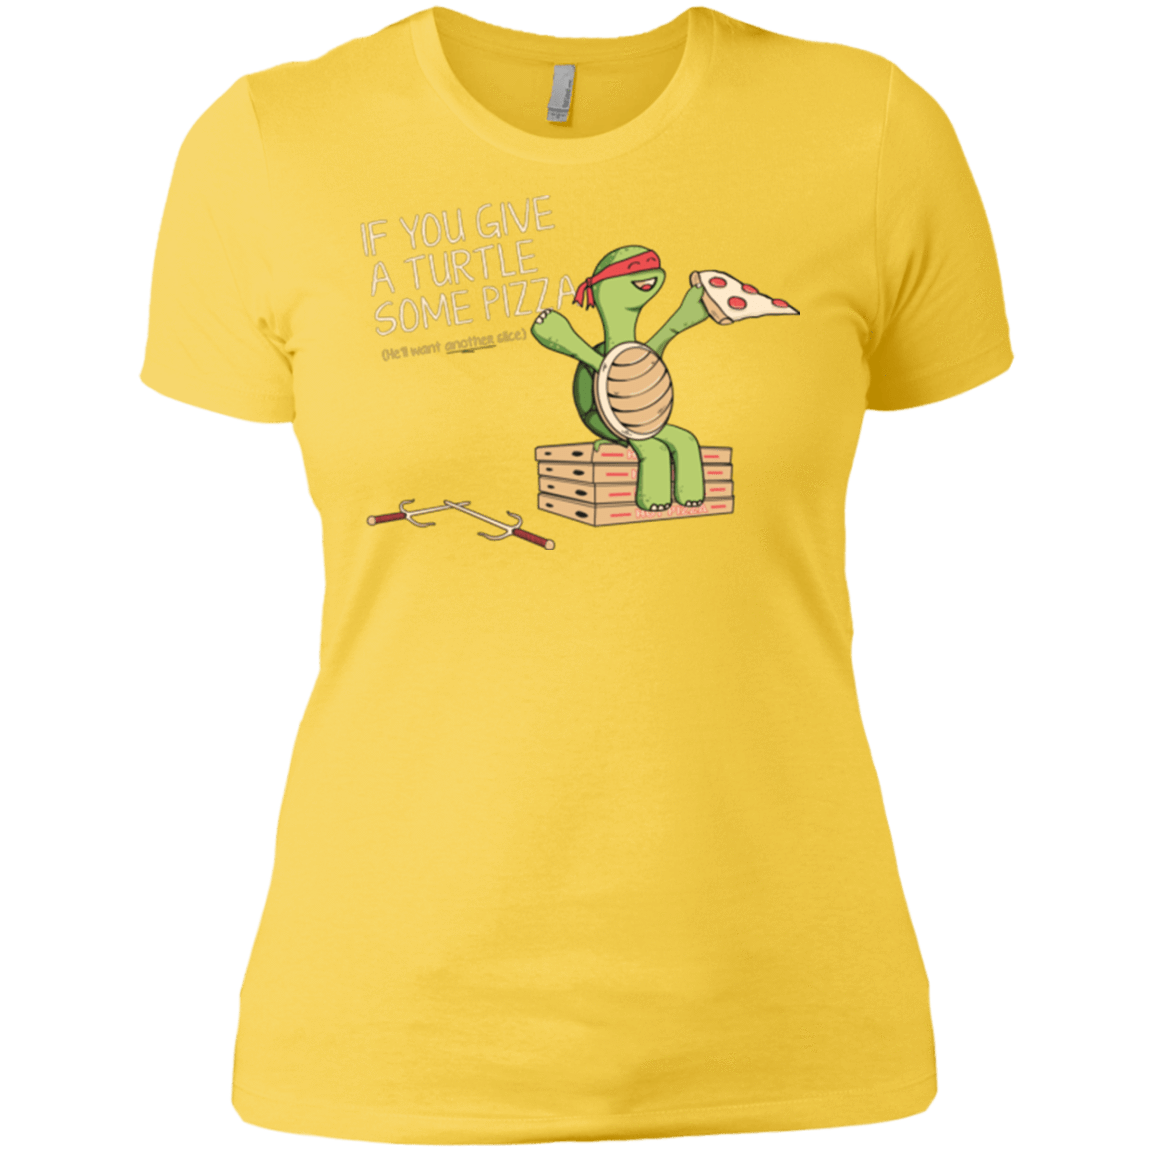 T-Shirts Vibrant Yellow / X-Small Give a Turtle Women's Premium T-Shirt